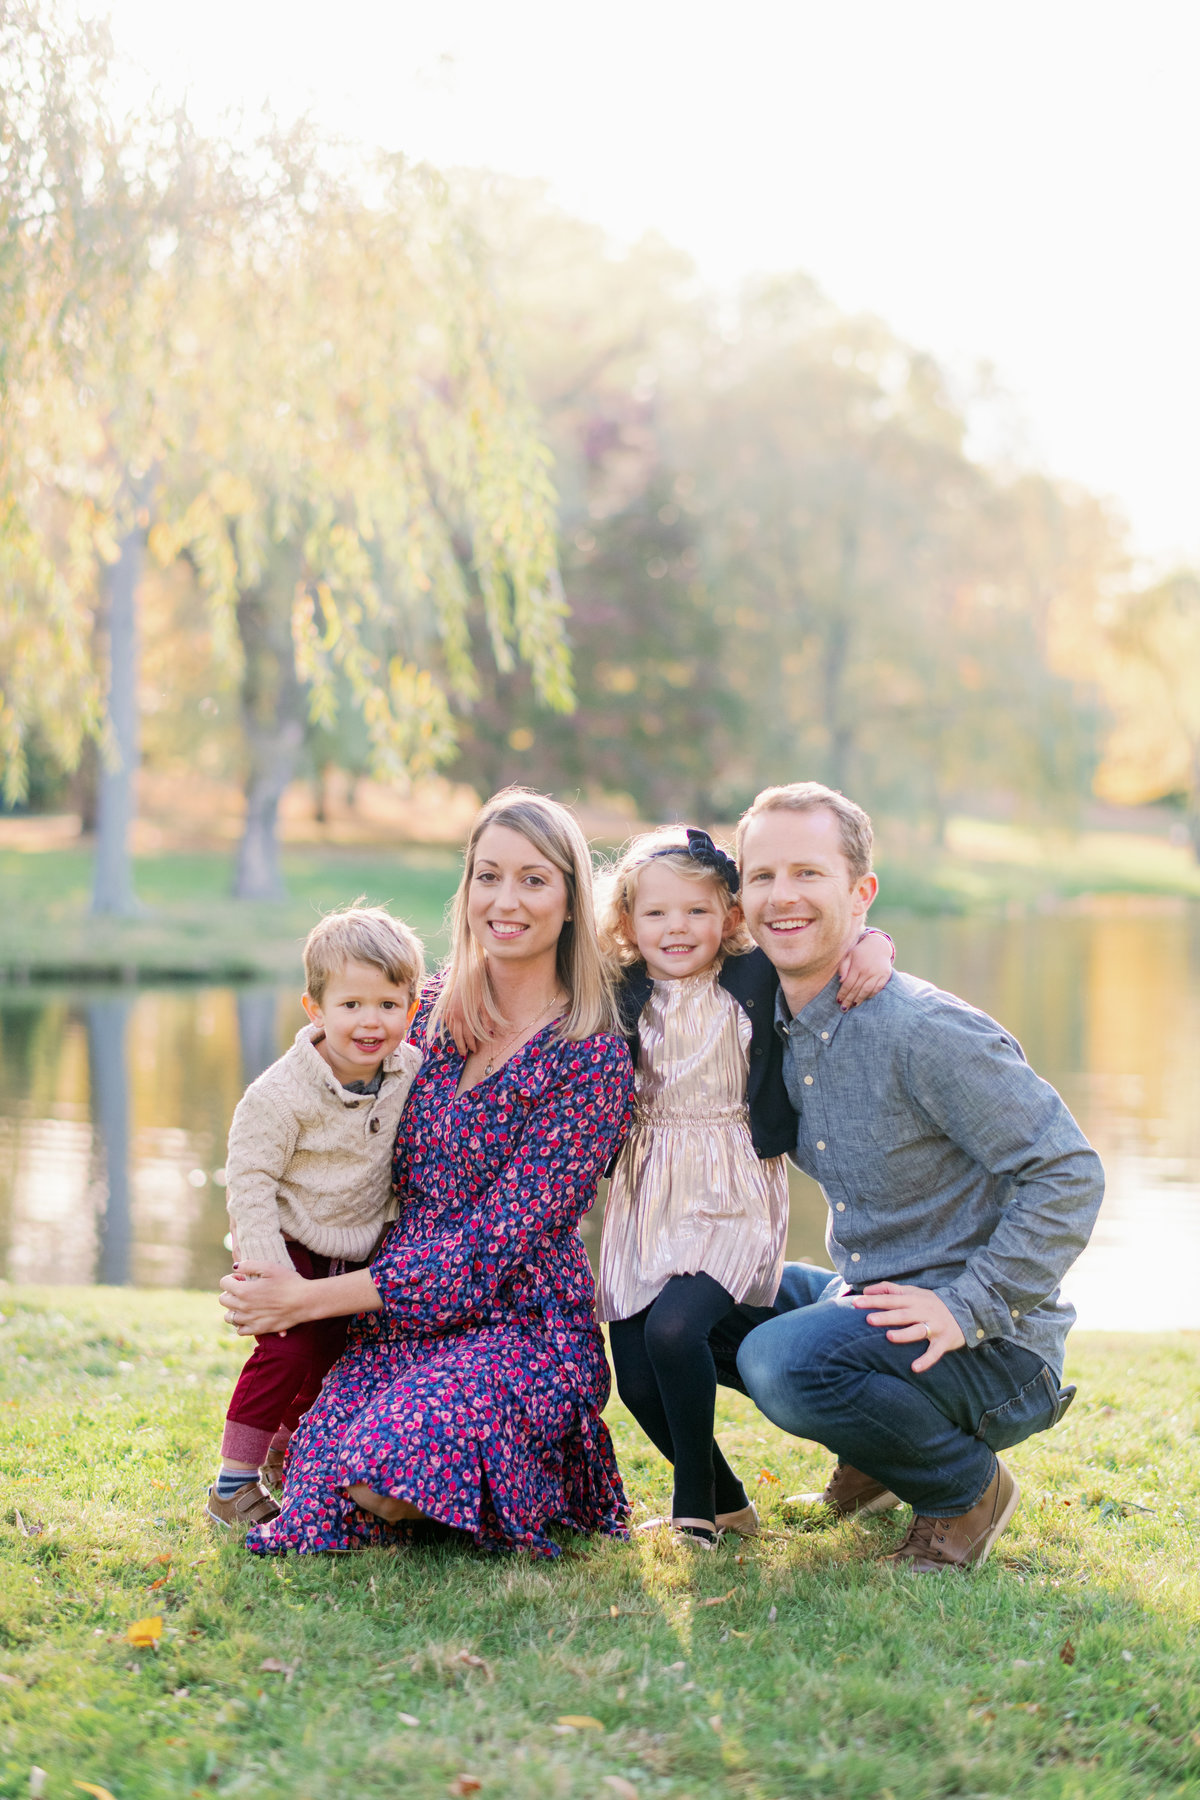 jessica deyoung photography - hayesfamily2019-42